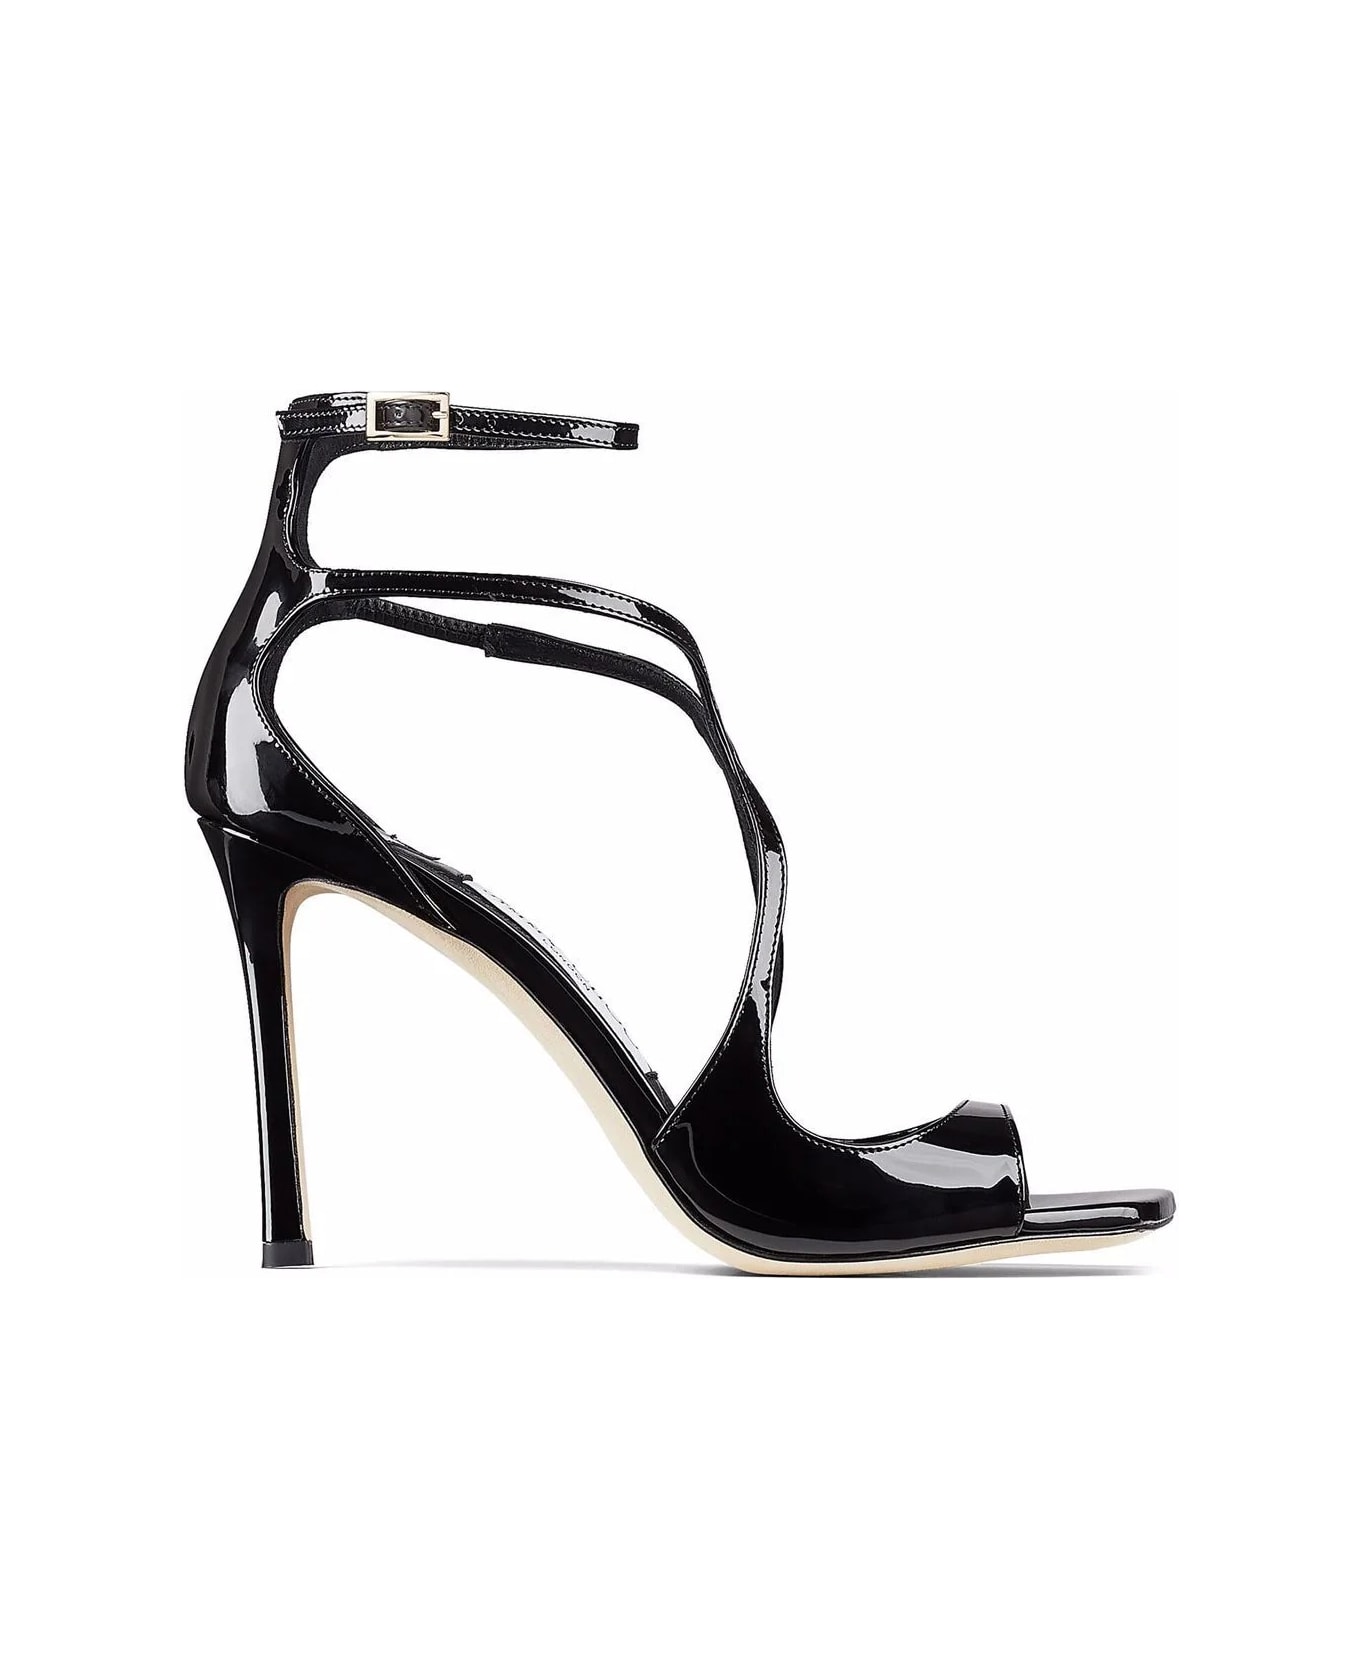 Jimmy Choo Azia Sandals In Black Patent Leather - Black